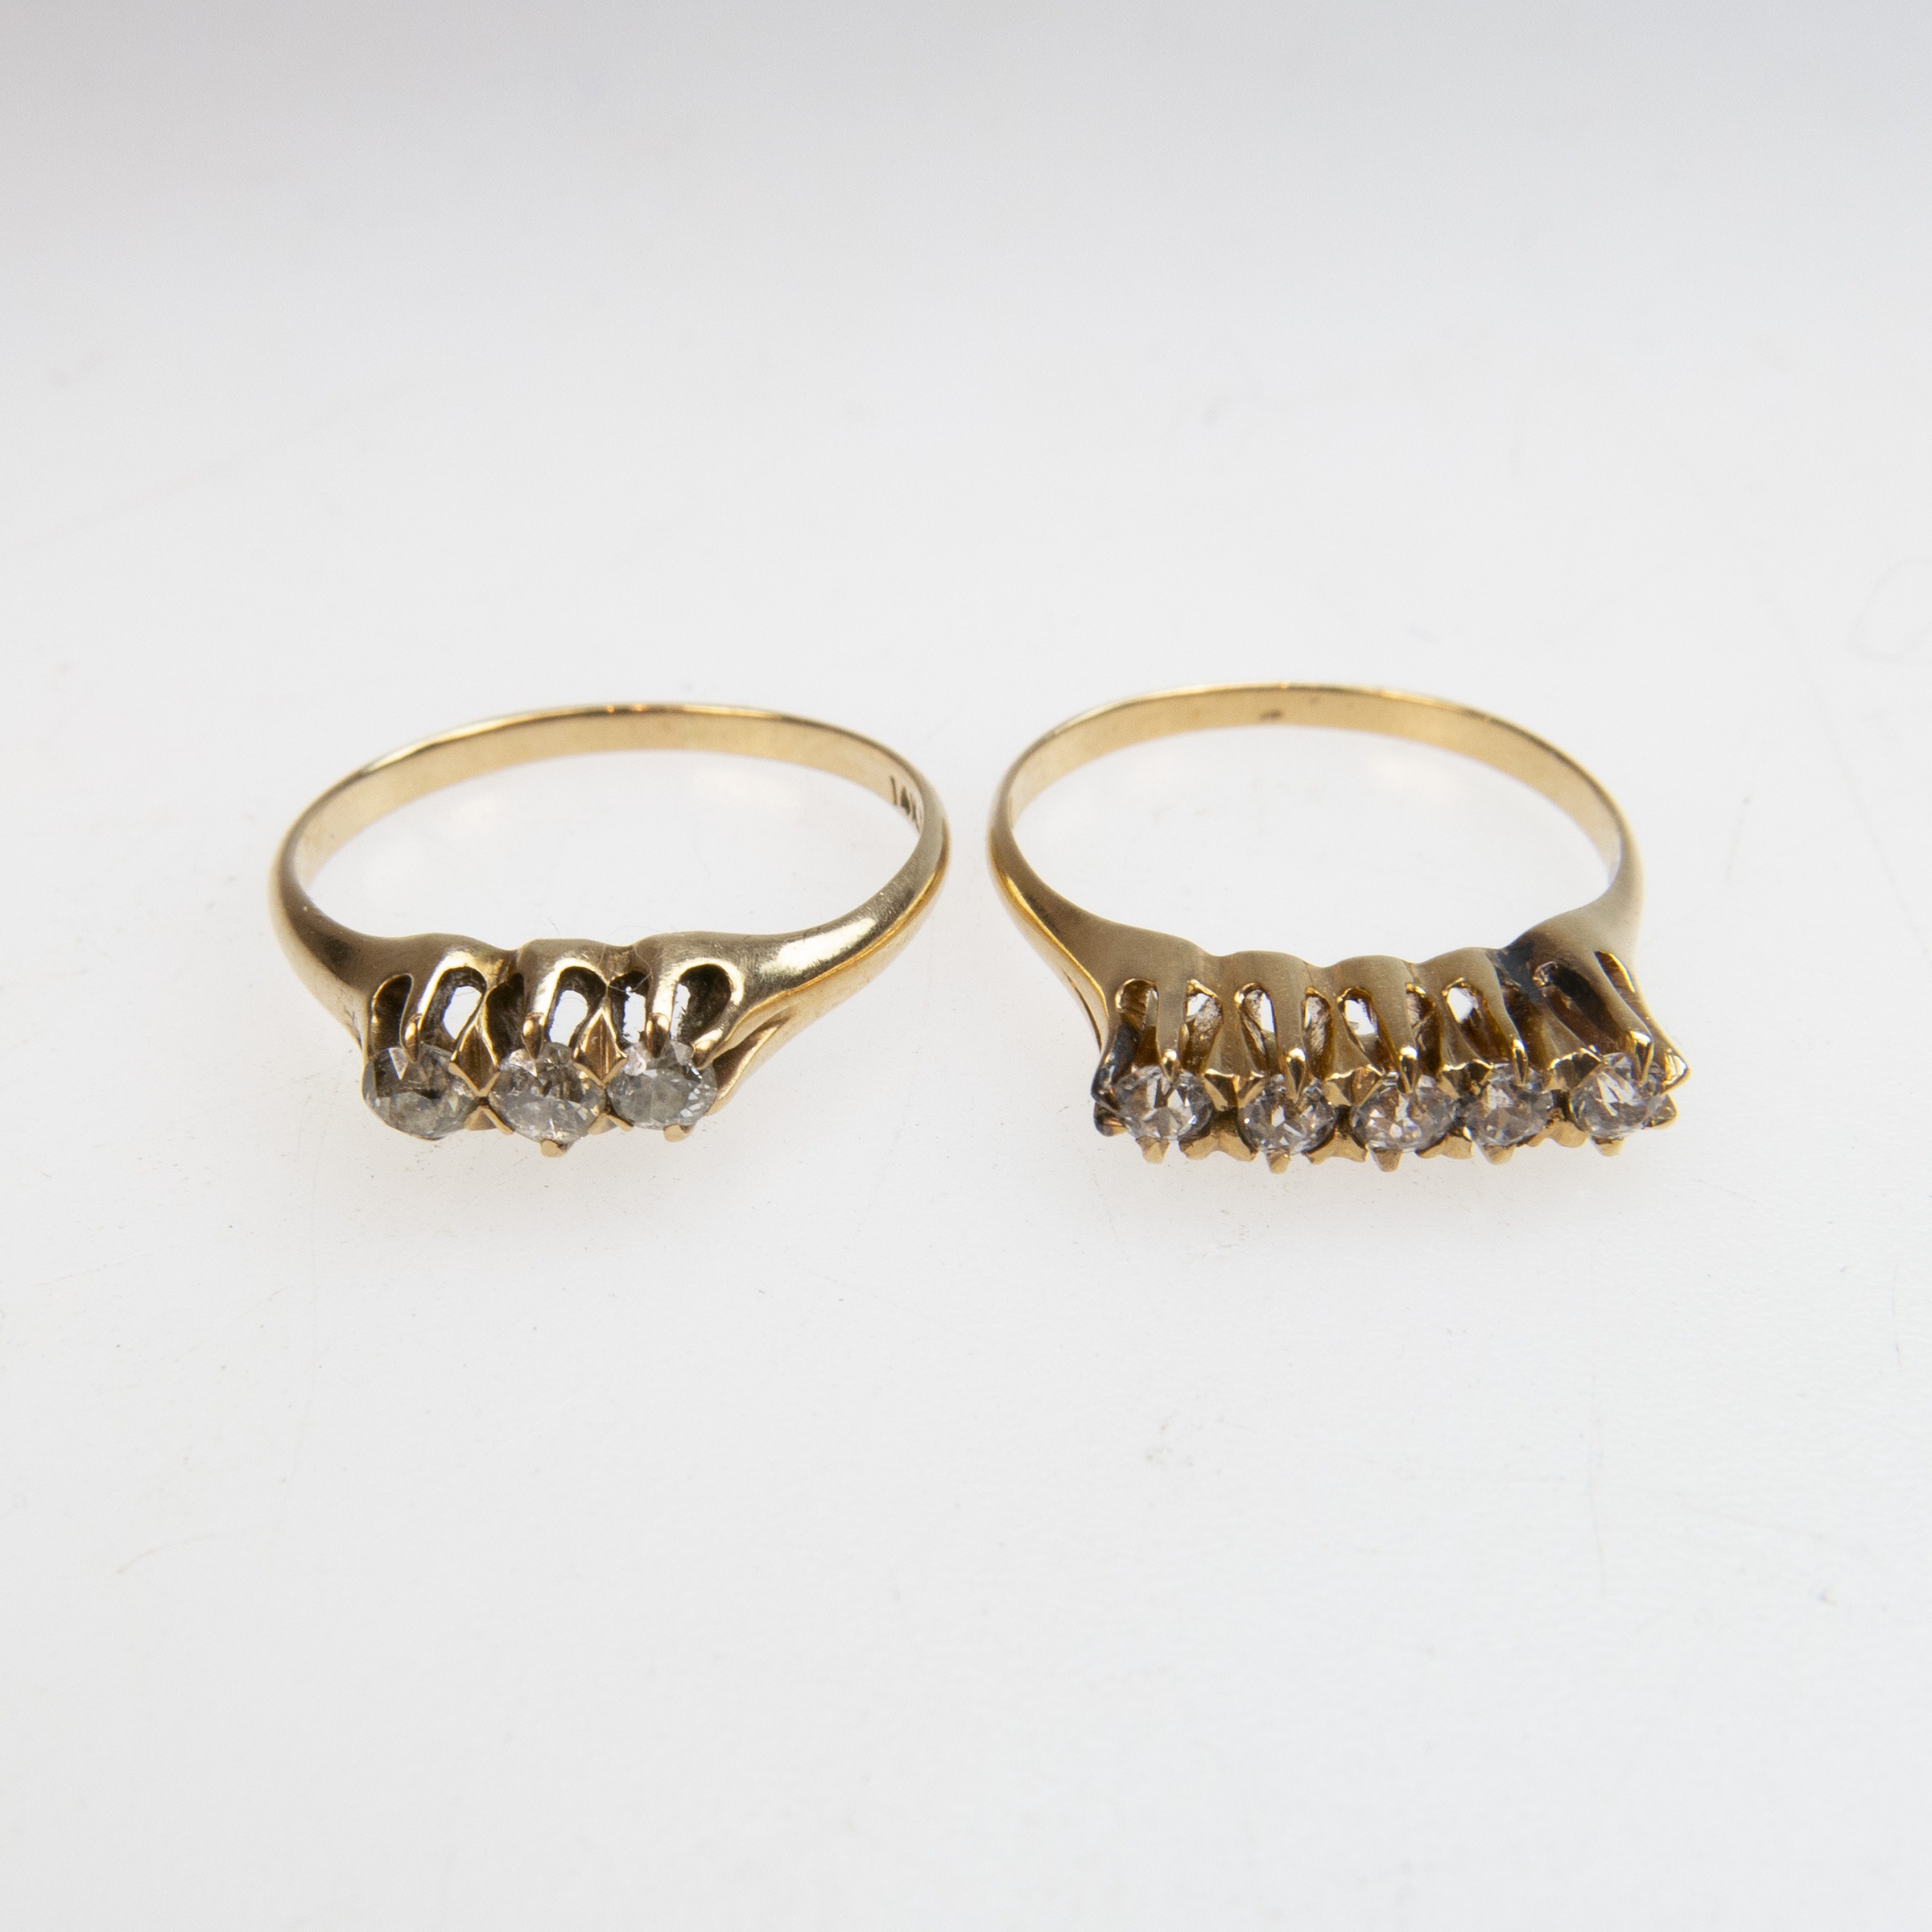 1 x 10k and 1 x 14k Yellow Gold Rings